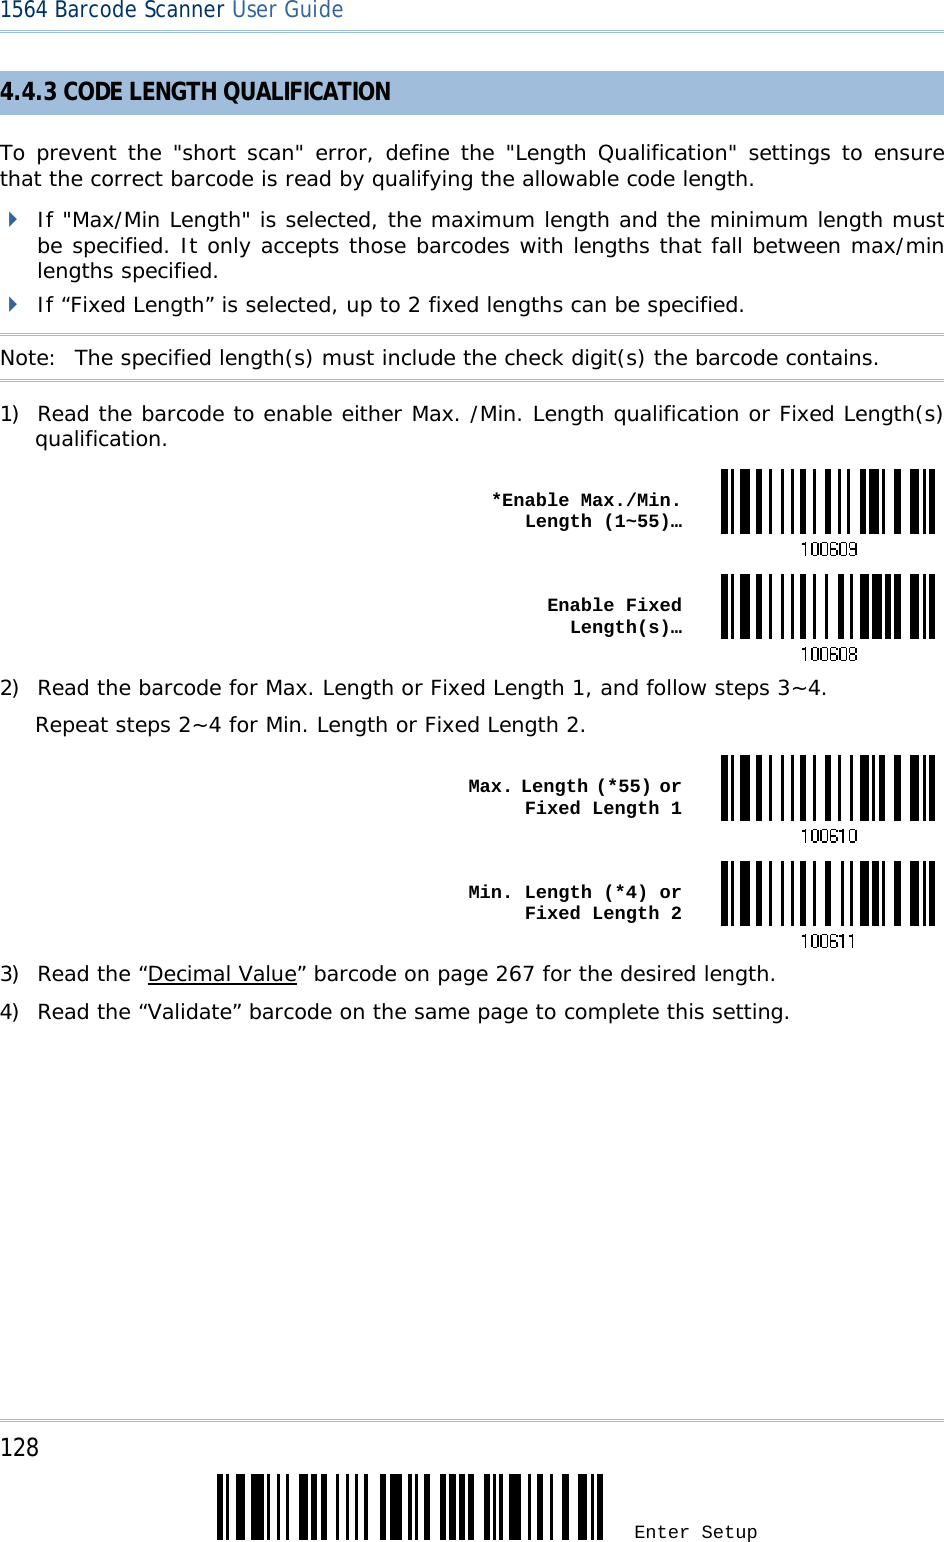 128 Enter Setup 1564 Barcode Scanner User Guide  4.4.3 CODE LENGTH QUALIFICATION To prevent the &quot;short scan&quot; error, define the &quot;Length Qualification&quot; settings to ensure that the correct barcode is read by qualifying the allowable code length.  If &quot;Max/Min Length&quot; is selected, the maximum length and the minimum length must be specified. It only accepts those barcodes with lengths that fall between max/min lengths specified.  If “Fixed Length” is selected, up to 2 fixed lengths can be specified. Note:   The specified length(s) must include the check digit(s) the barcode contains. 1) Read the barcode to enable either Max. /Min. Length qualification or Fixed Length(s) qualification.  *Enable Max./Min. Length (1~55)… Enable Fixed Length(s)…2) Read the barcode for Max. Length or Fixed Length 1, and follow steps 3~4. Repeat steps 2~4 for Min. Length or Fixed Length 2.  Max. Length (*55) or Fixed Length 1 Min. Length (*4) or Fixed Length 23) Read the “Decimal Value” barcode on page 267 for the desired length.  4) Read the “Validate” barcode on the same page to complete this setting. 